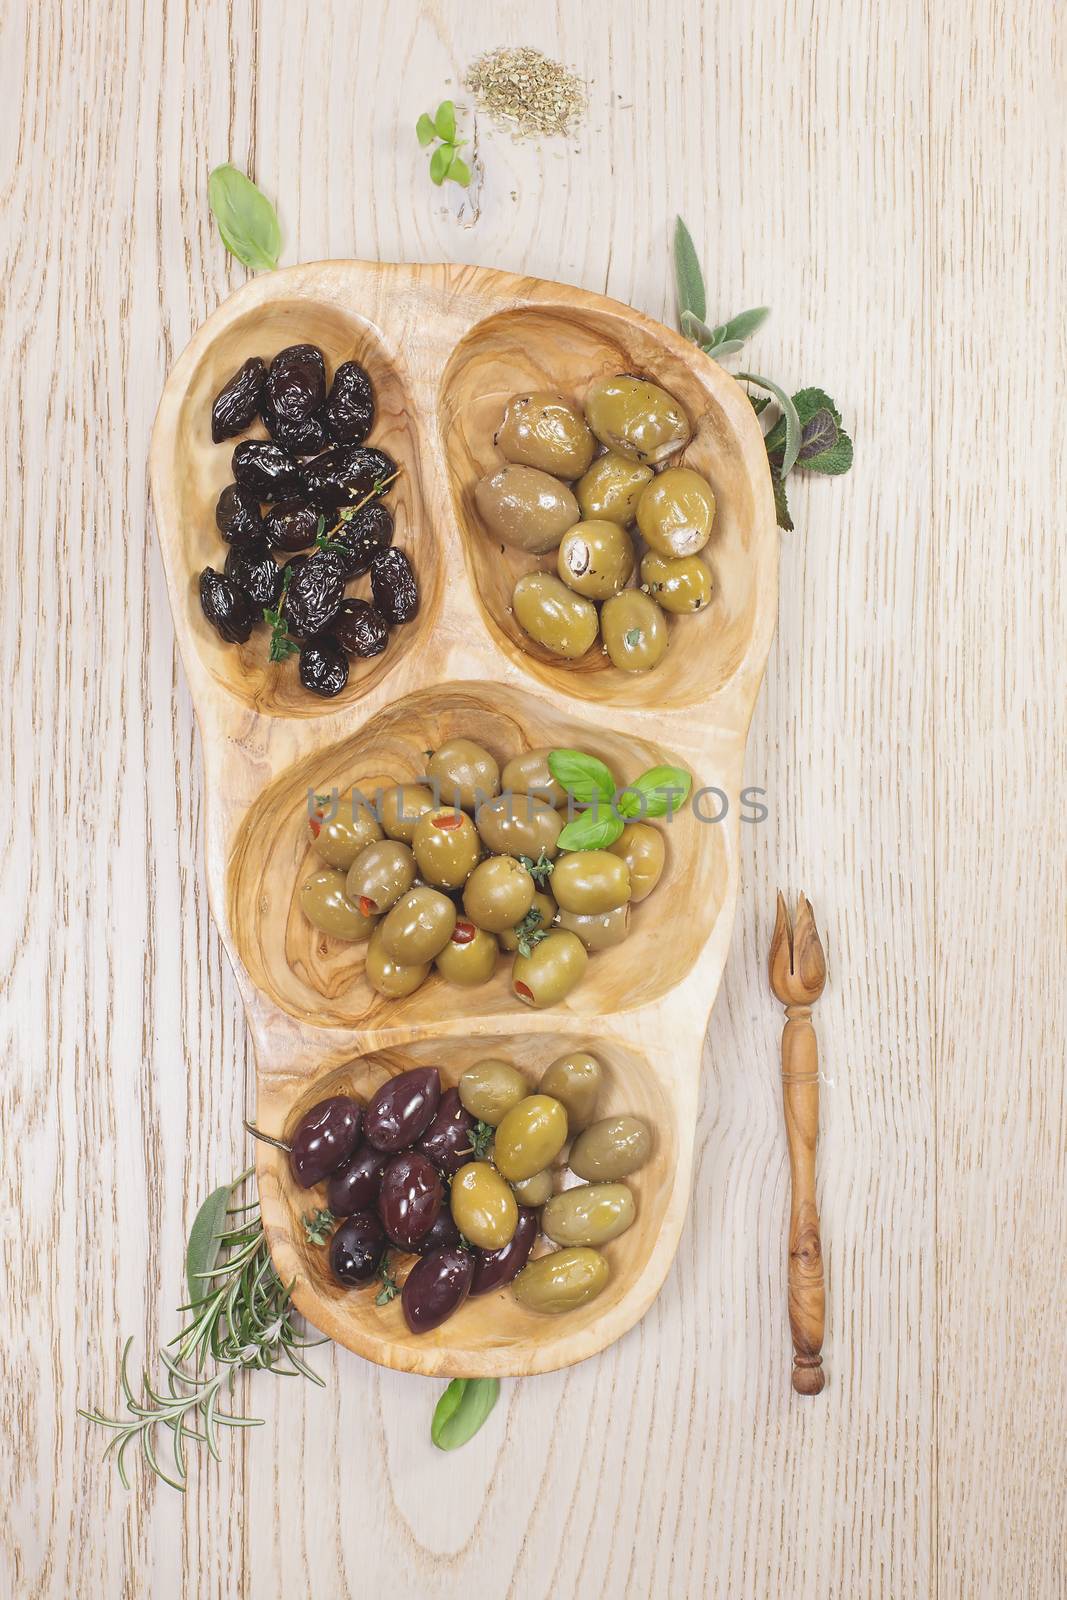 Variety of green, black and mixed marinated olives in olive tree dish on wooden table